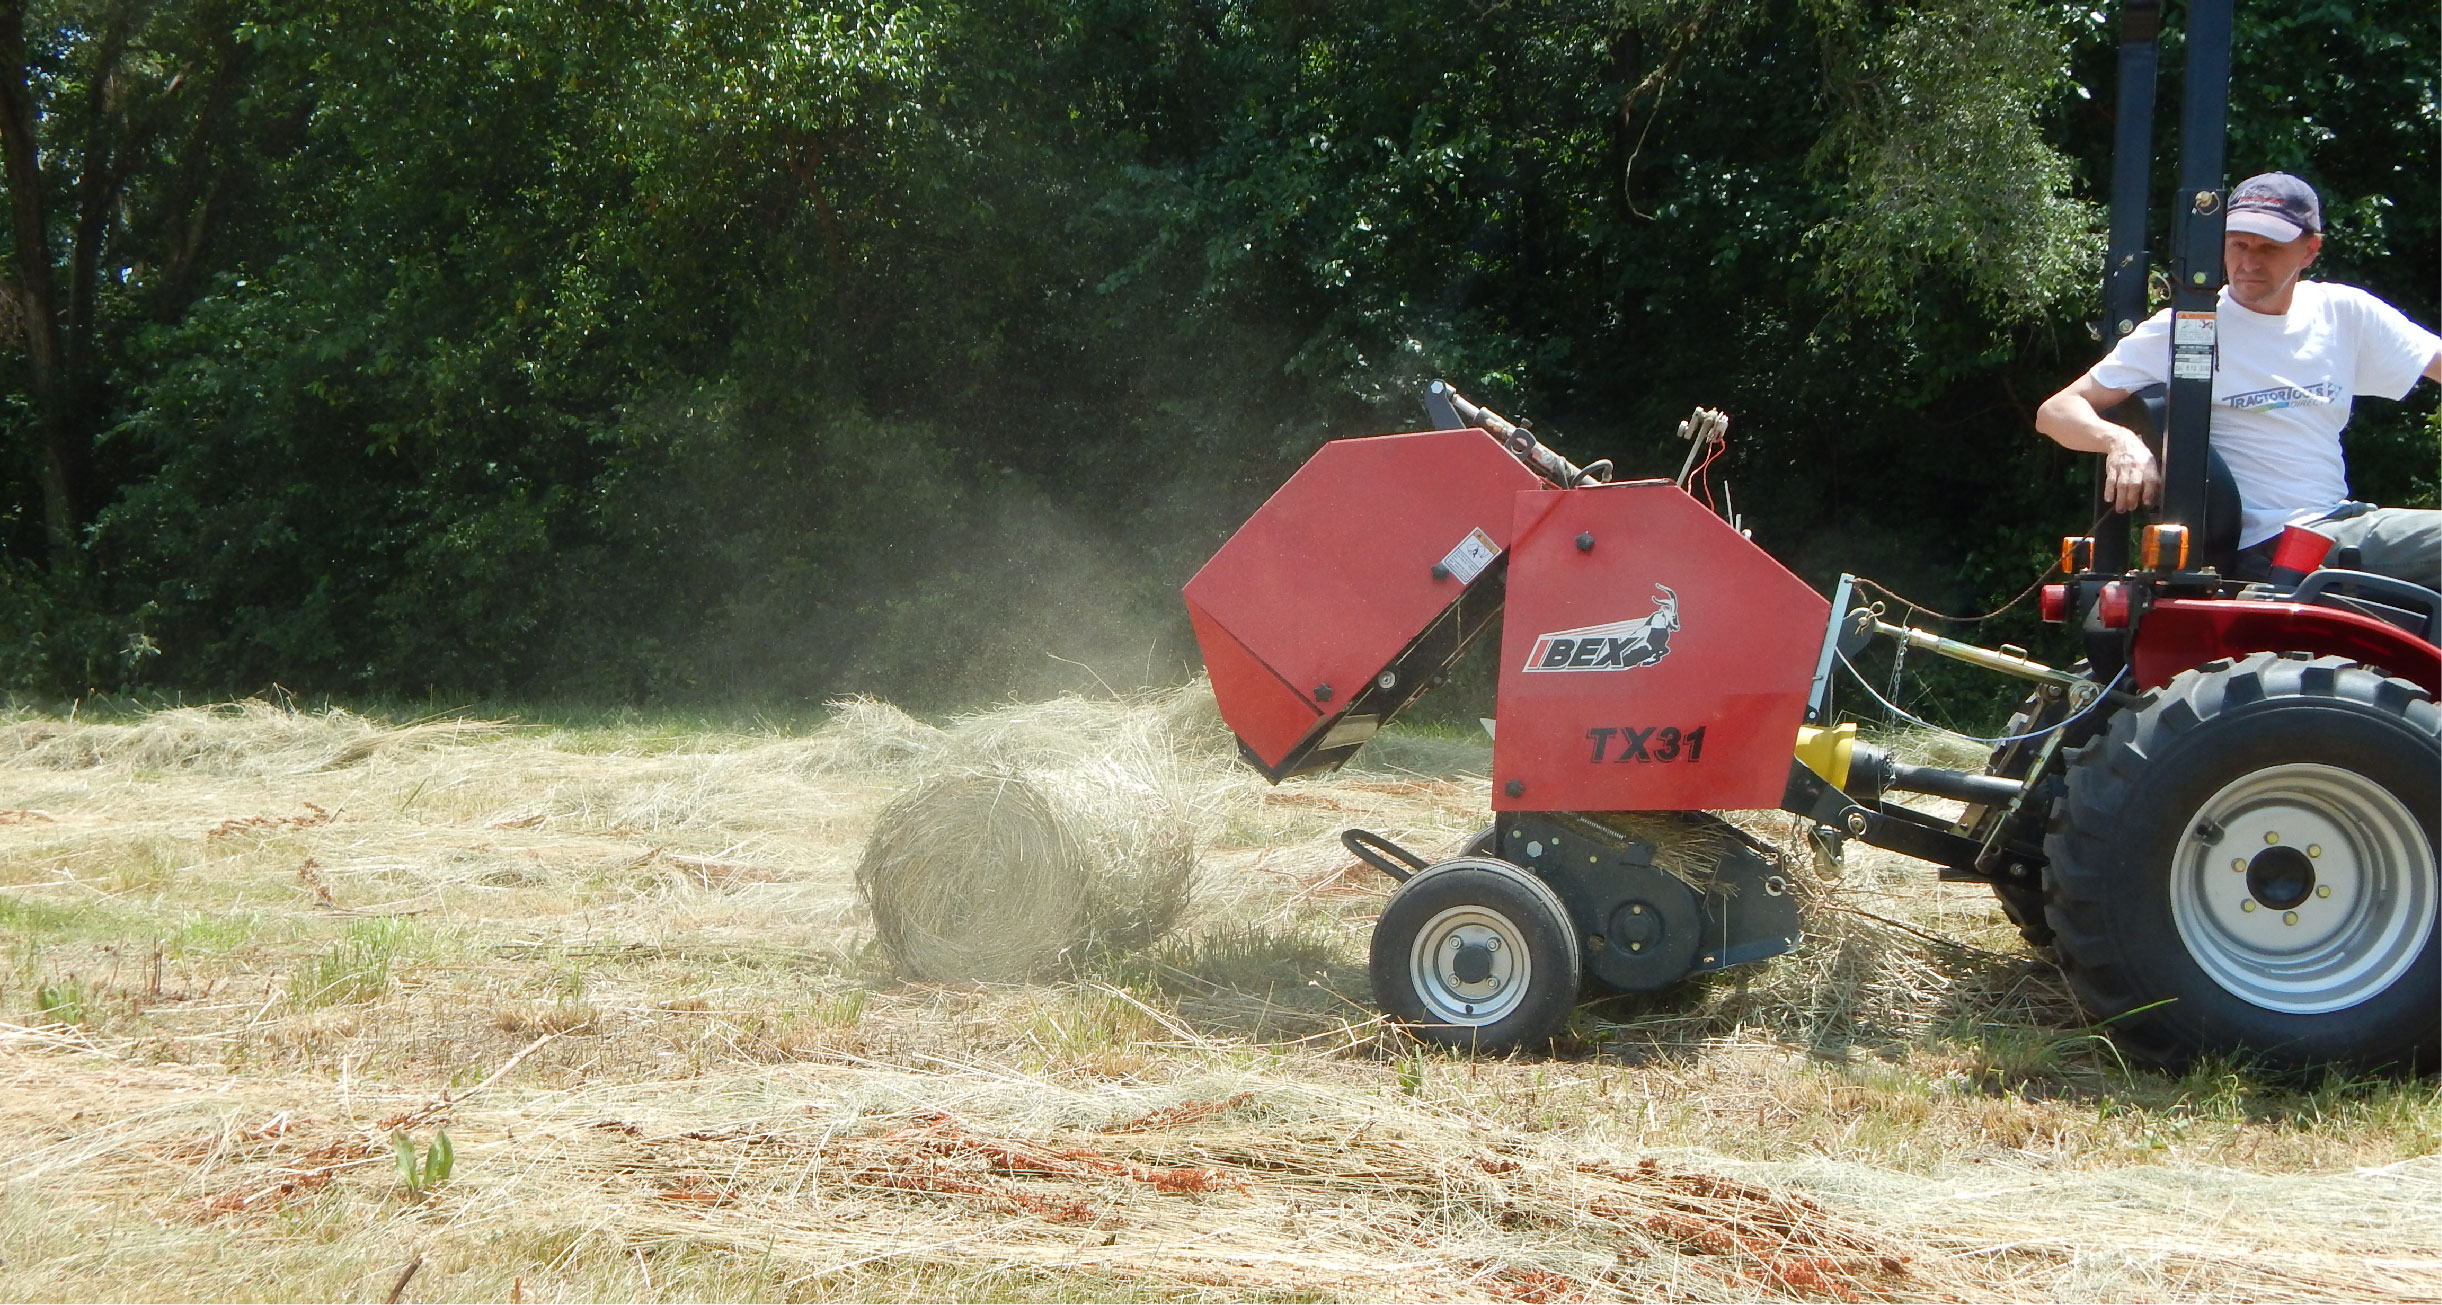 Ibex TX31 Mini Round Baler with Twine Wrap ejecting an mini round hay bale. 